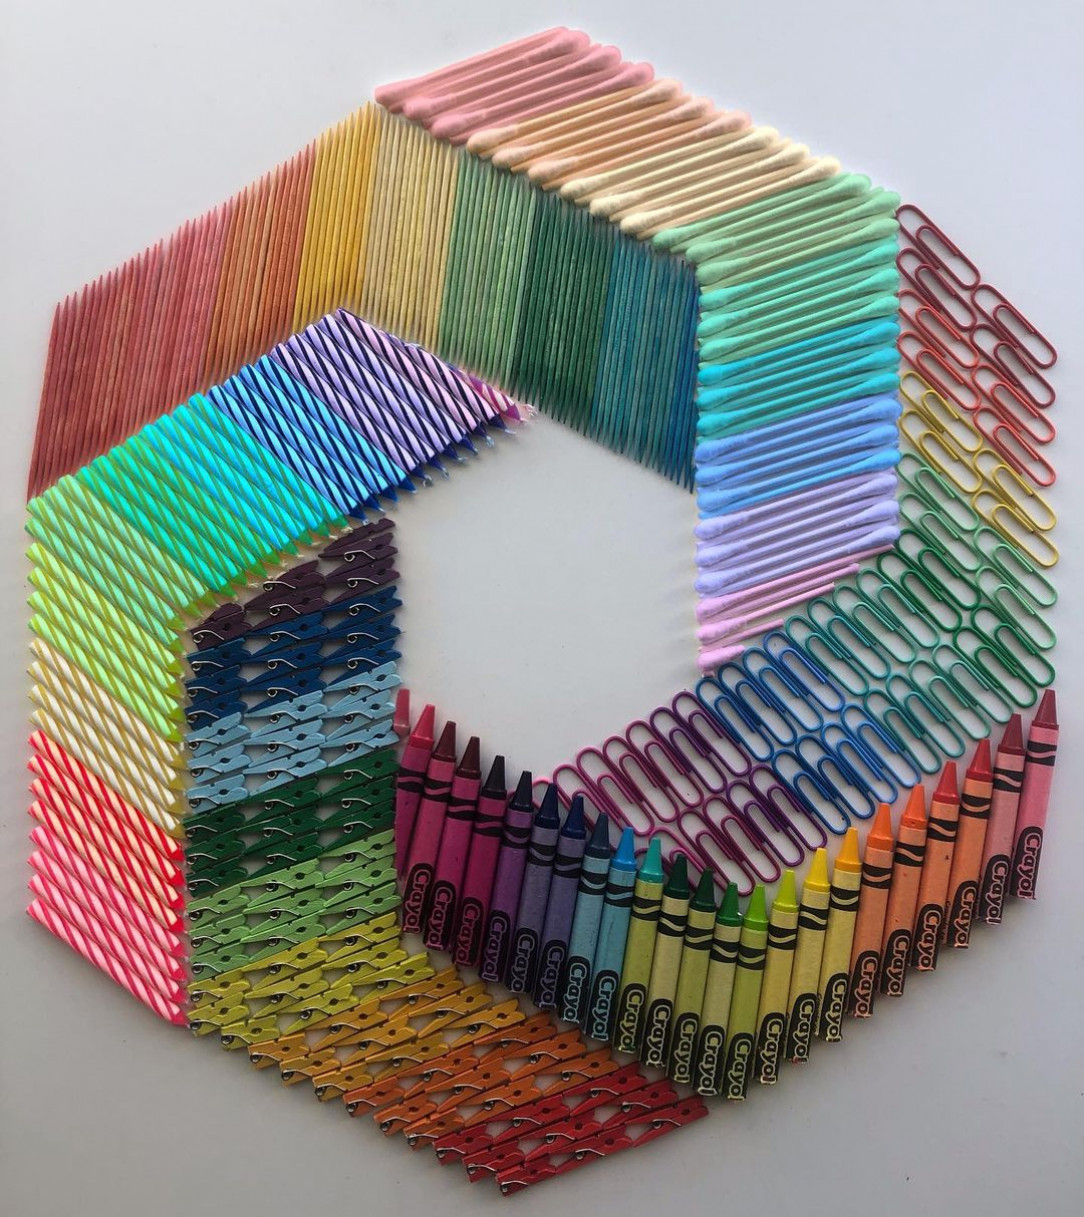 Colorful pattern with everyday objects